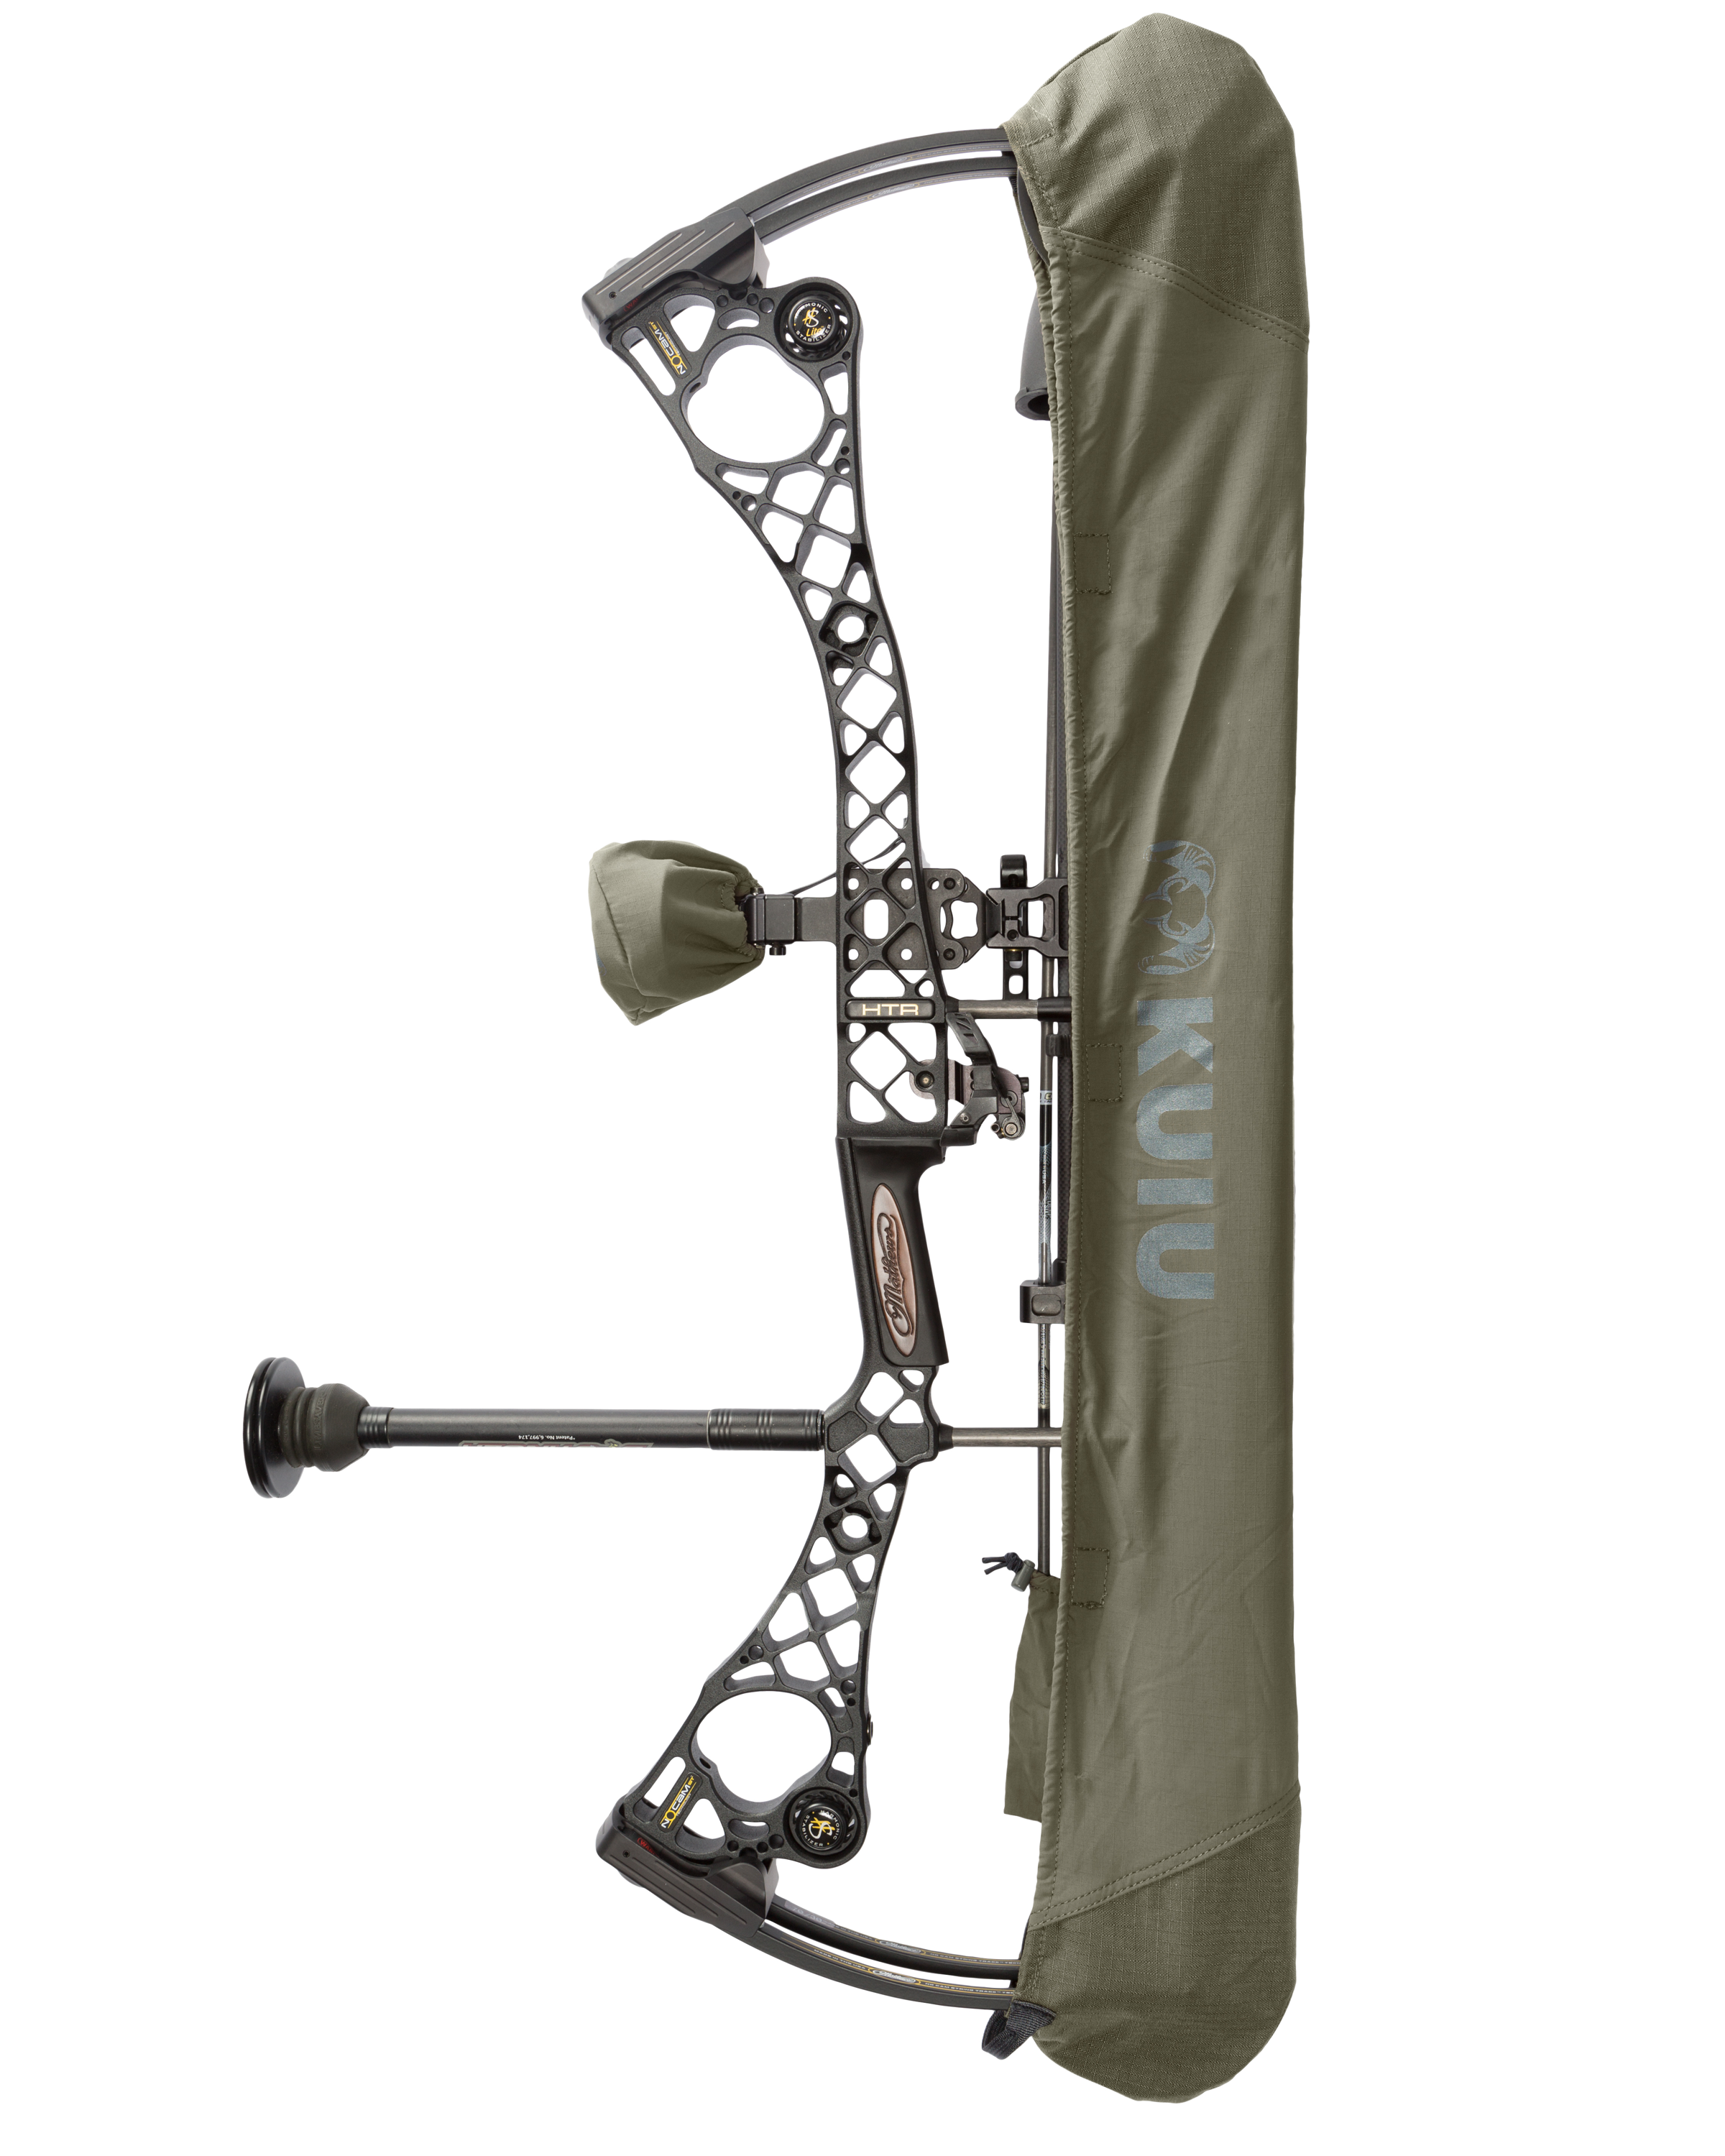 KUIU SFS Bow Cover Kit in Ash